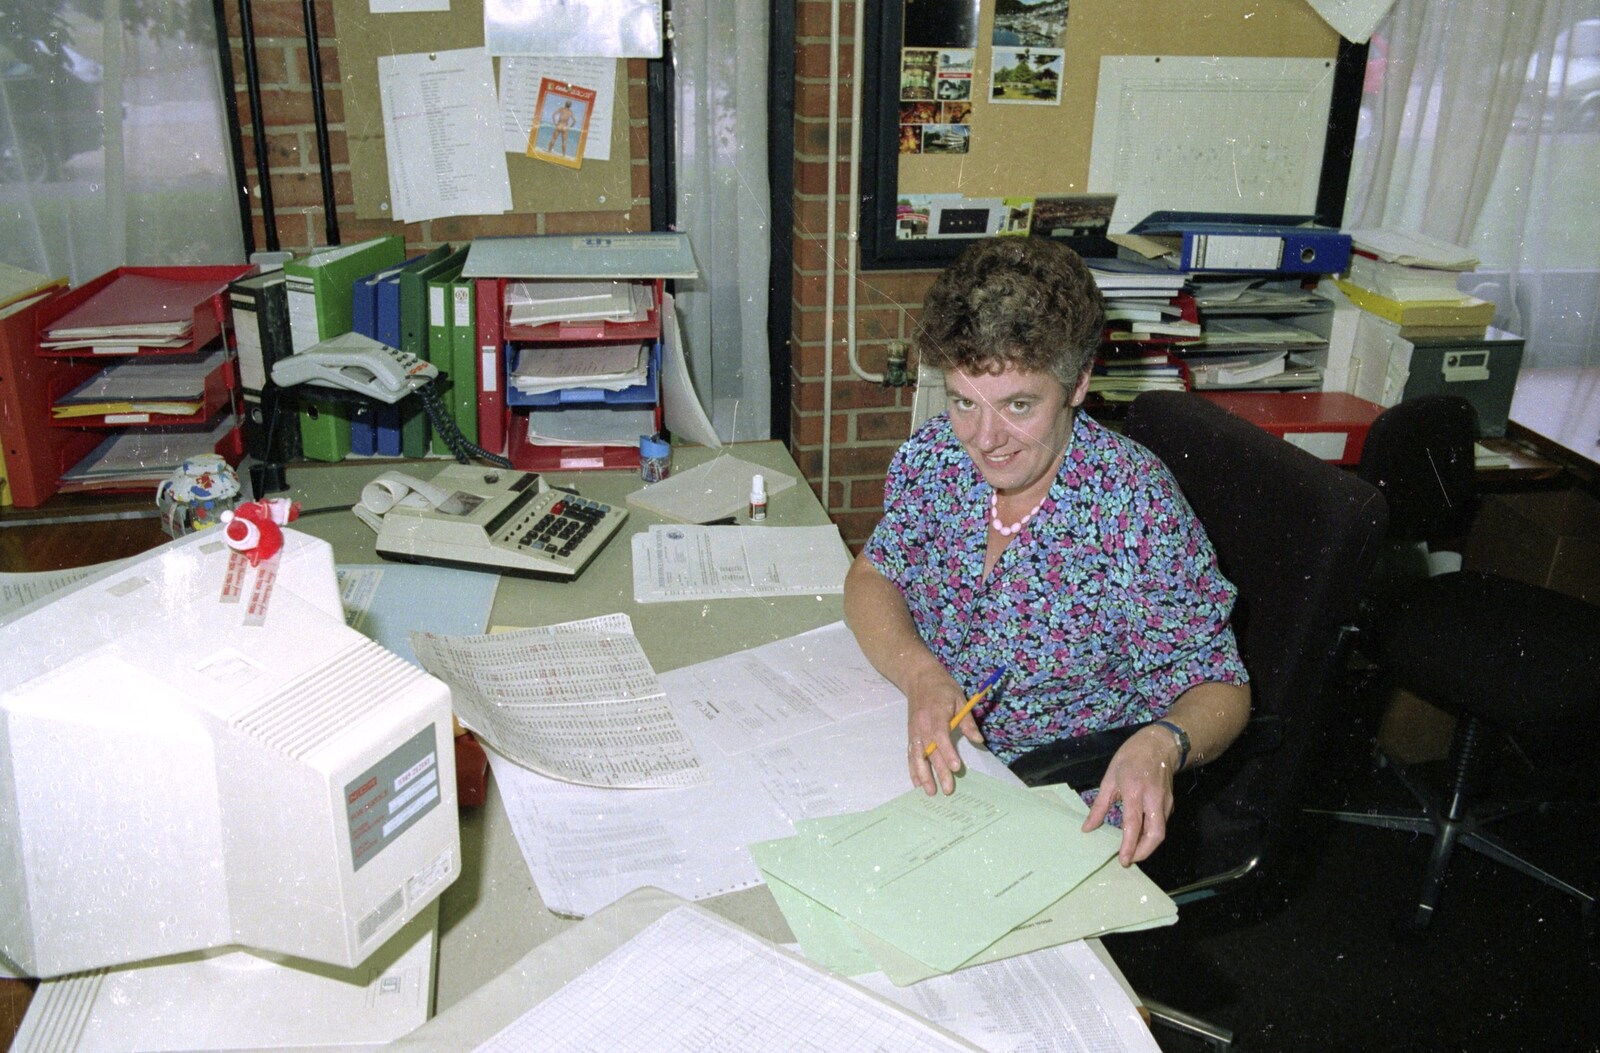 Crispy looks up from her desk from Kite Flying, and an Introduction to BPCC Printec, Diss, Norfolk - 3rd August 1989